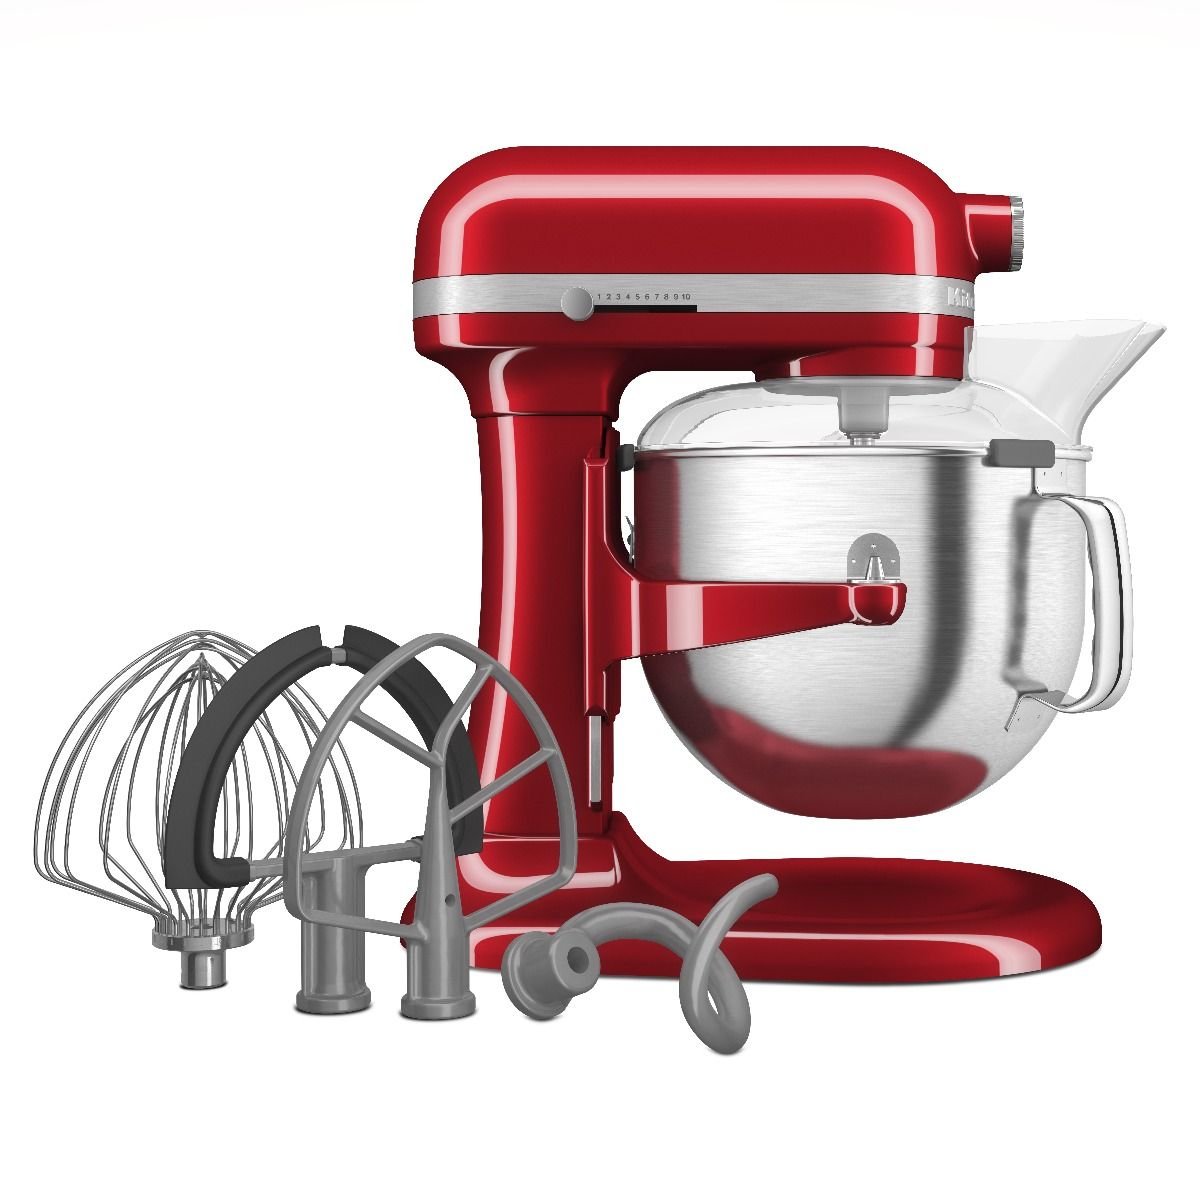 Stand Mixer Attachment Holders, Compatible with KitchenAid Mixer Attachments - for Storing Flex Edge Beater, Flat Beater & More - Space-Saving